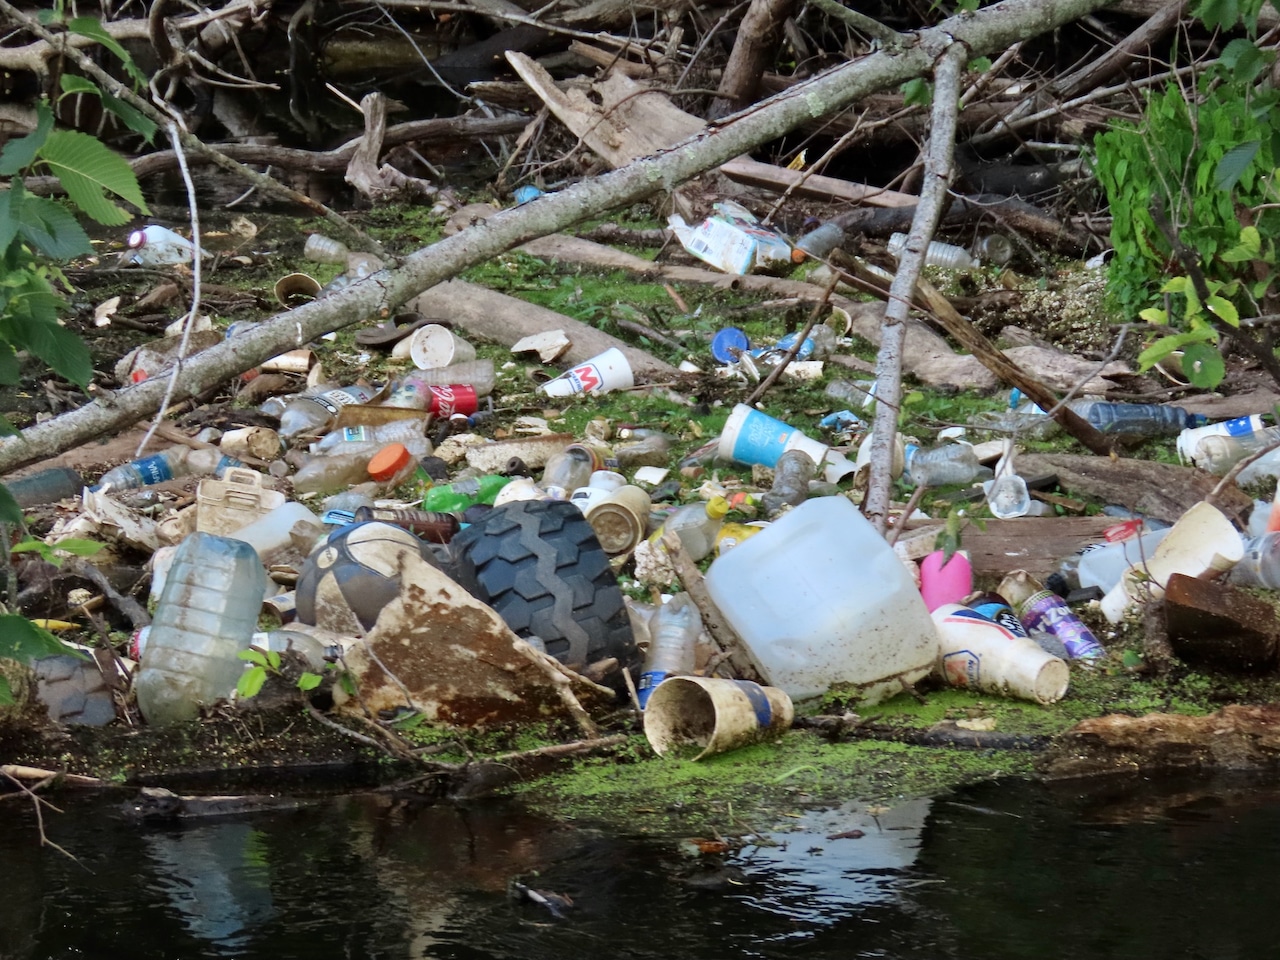 On this Earth Day, lets move to eradicate plastics | Opinion [Video]